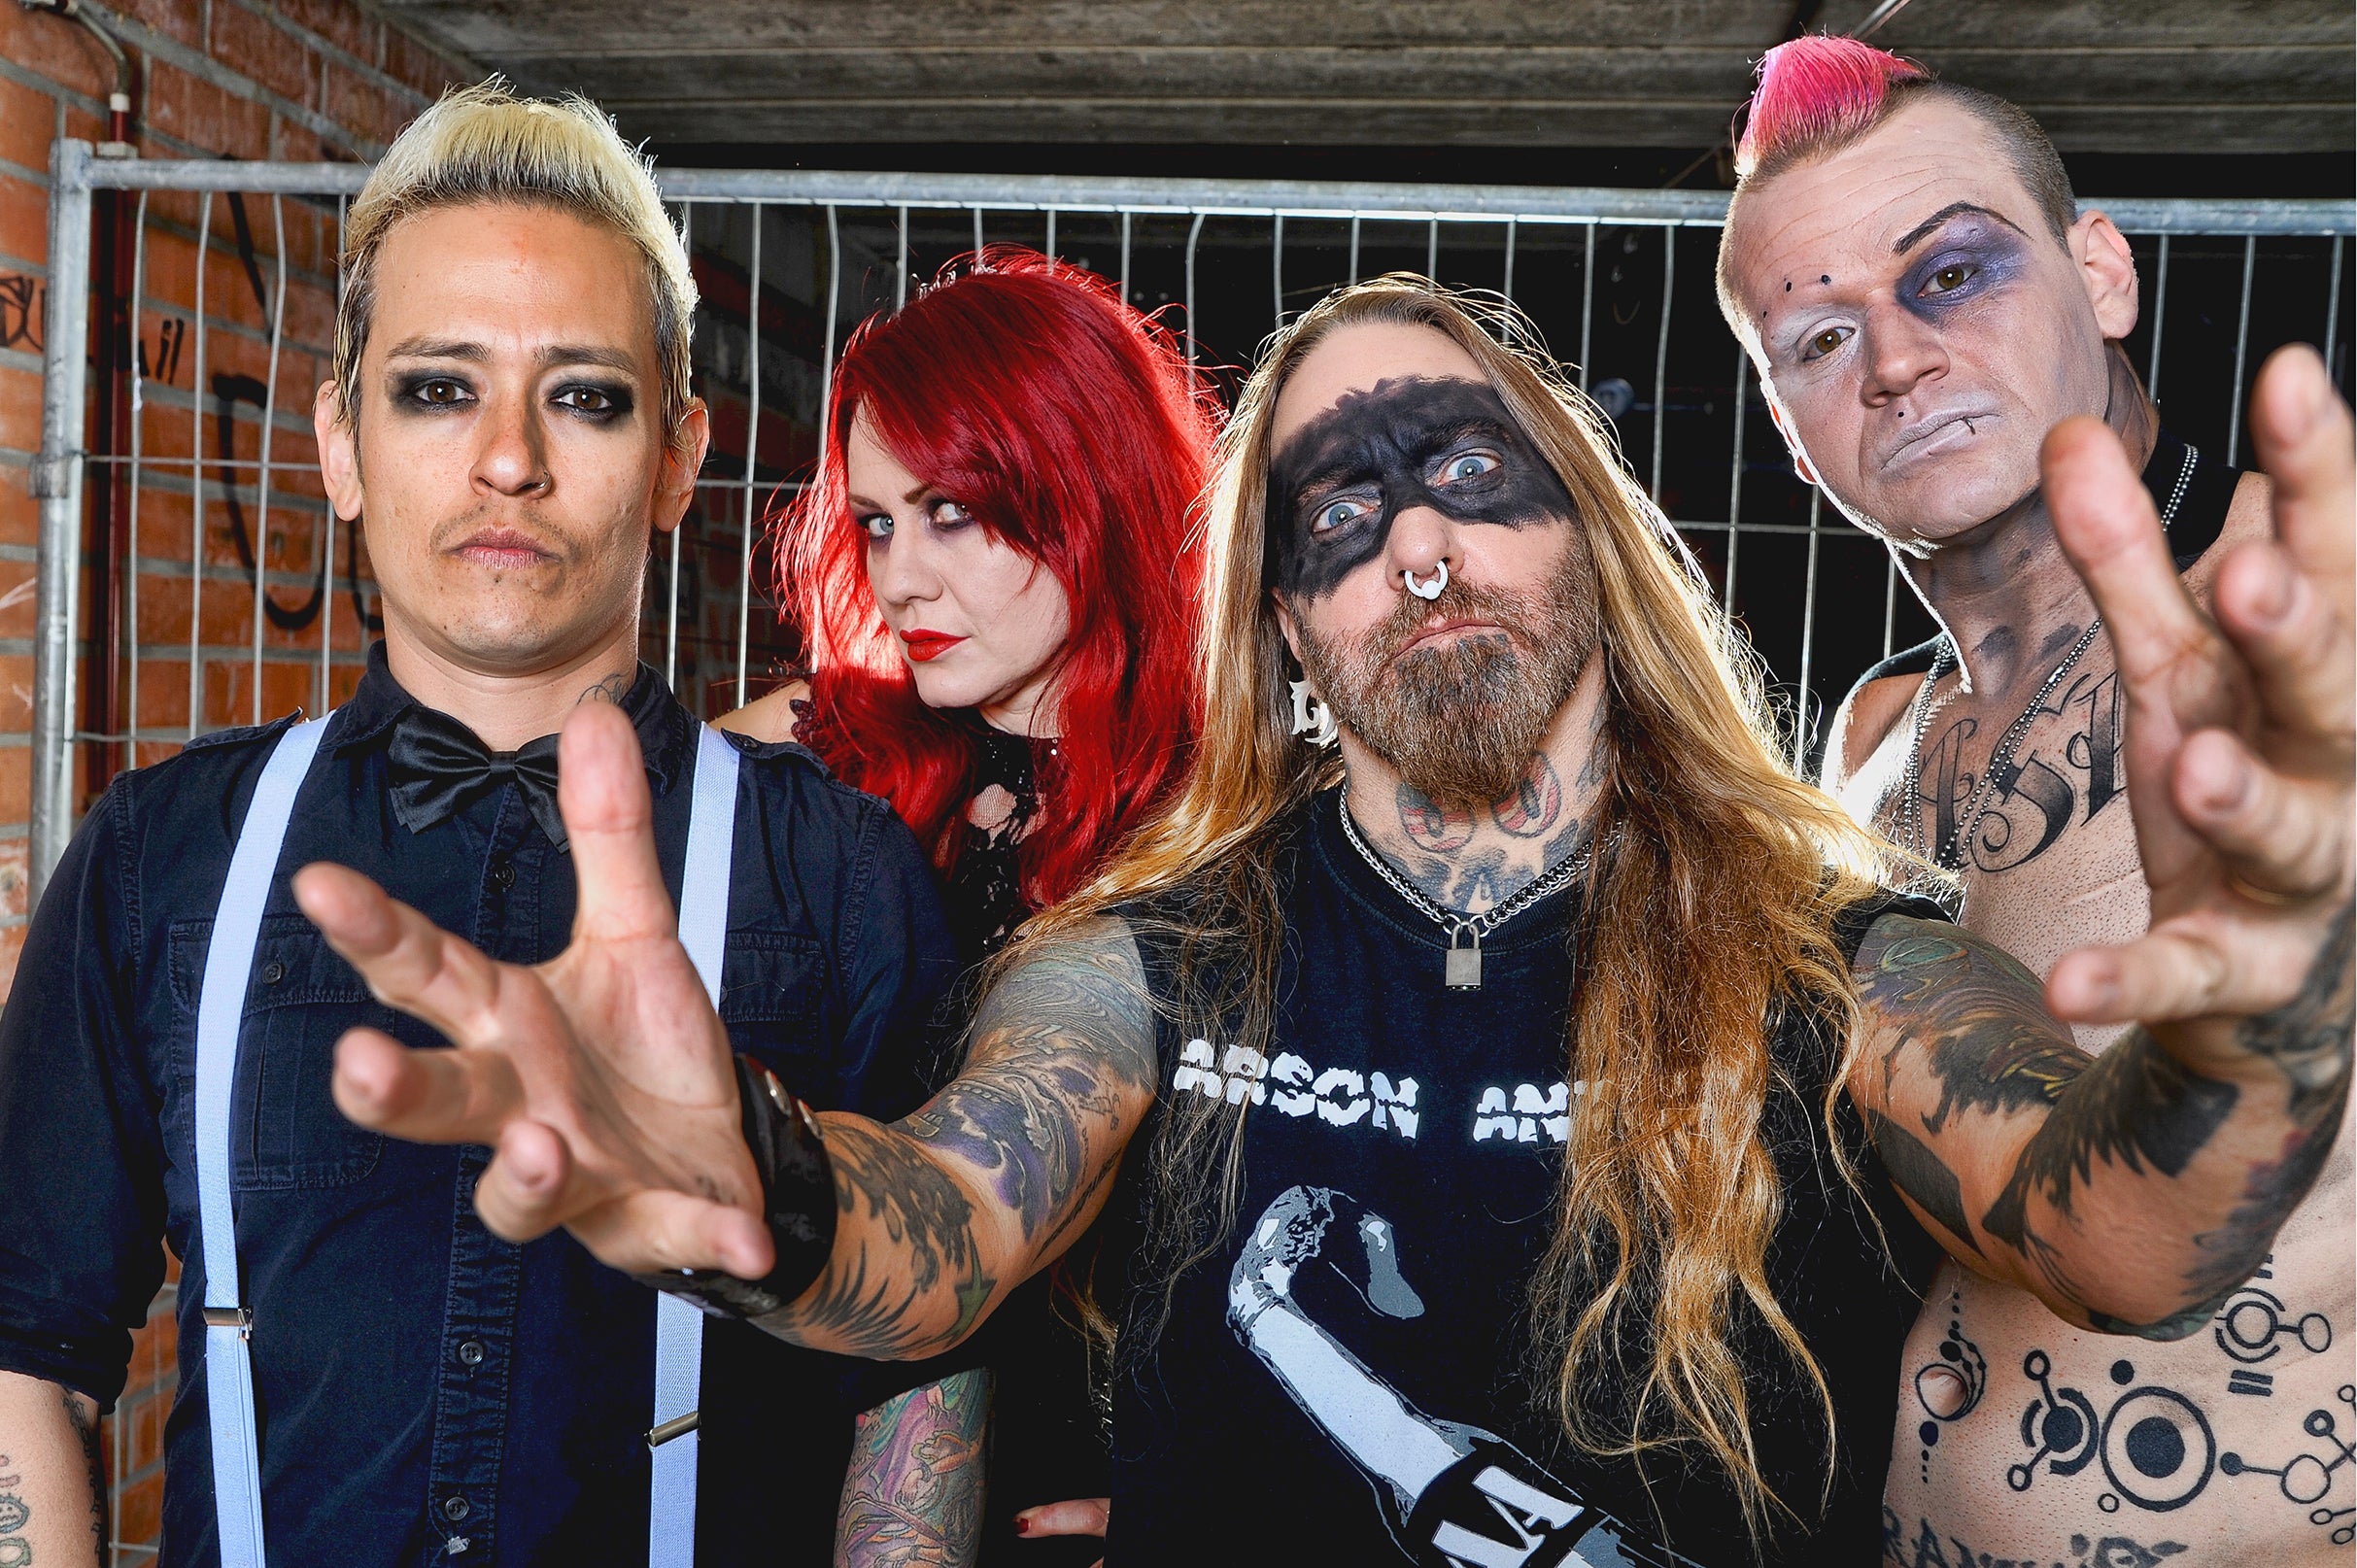 Coal Chamber with Fear Factory, Twiztid, Wednesday 13, Black Satellite